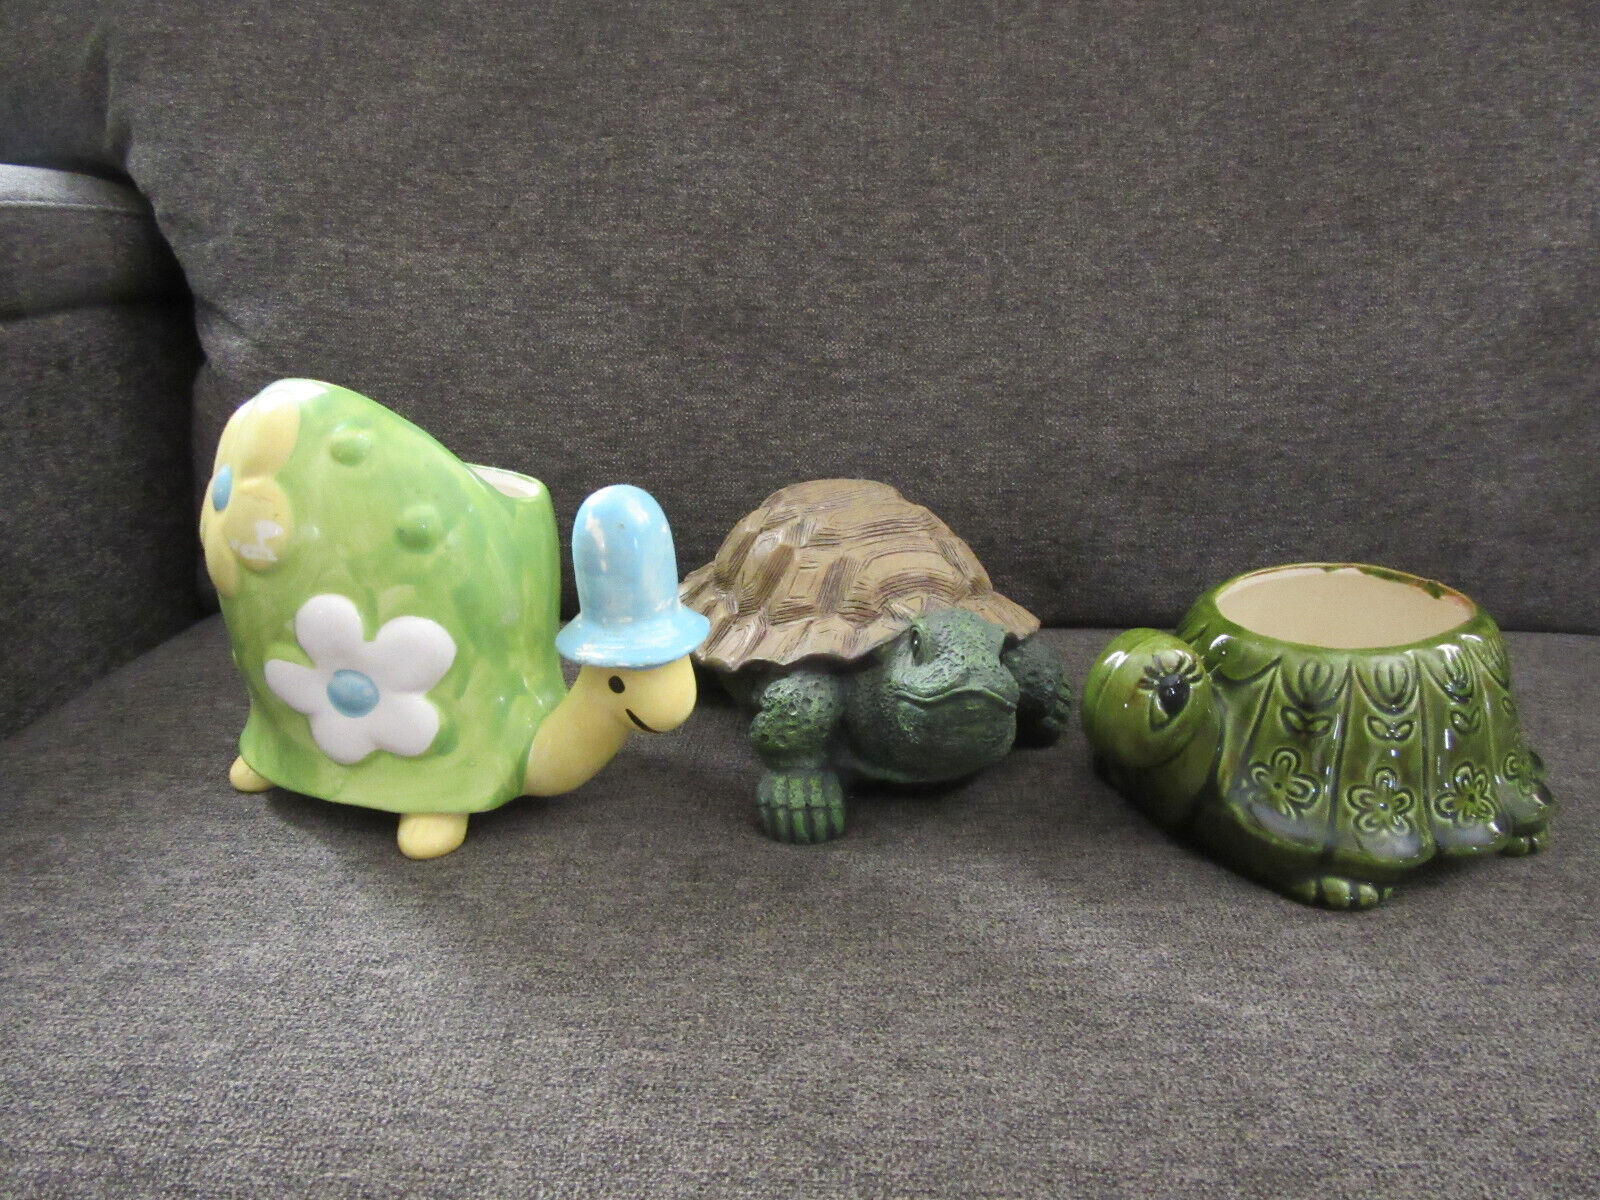 Turtle planters(2) and figure, group of 3, preowned, 